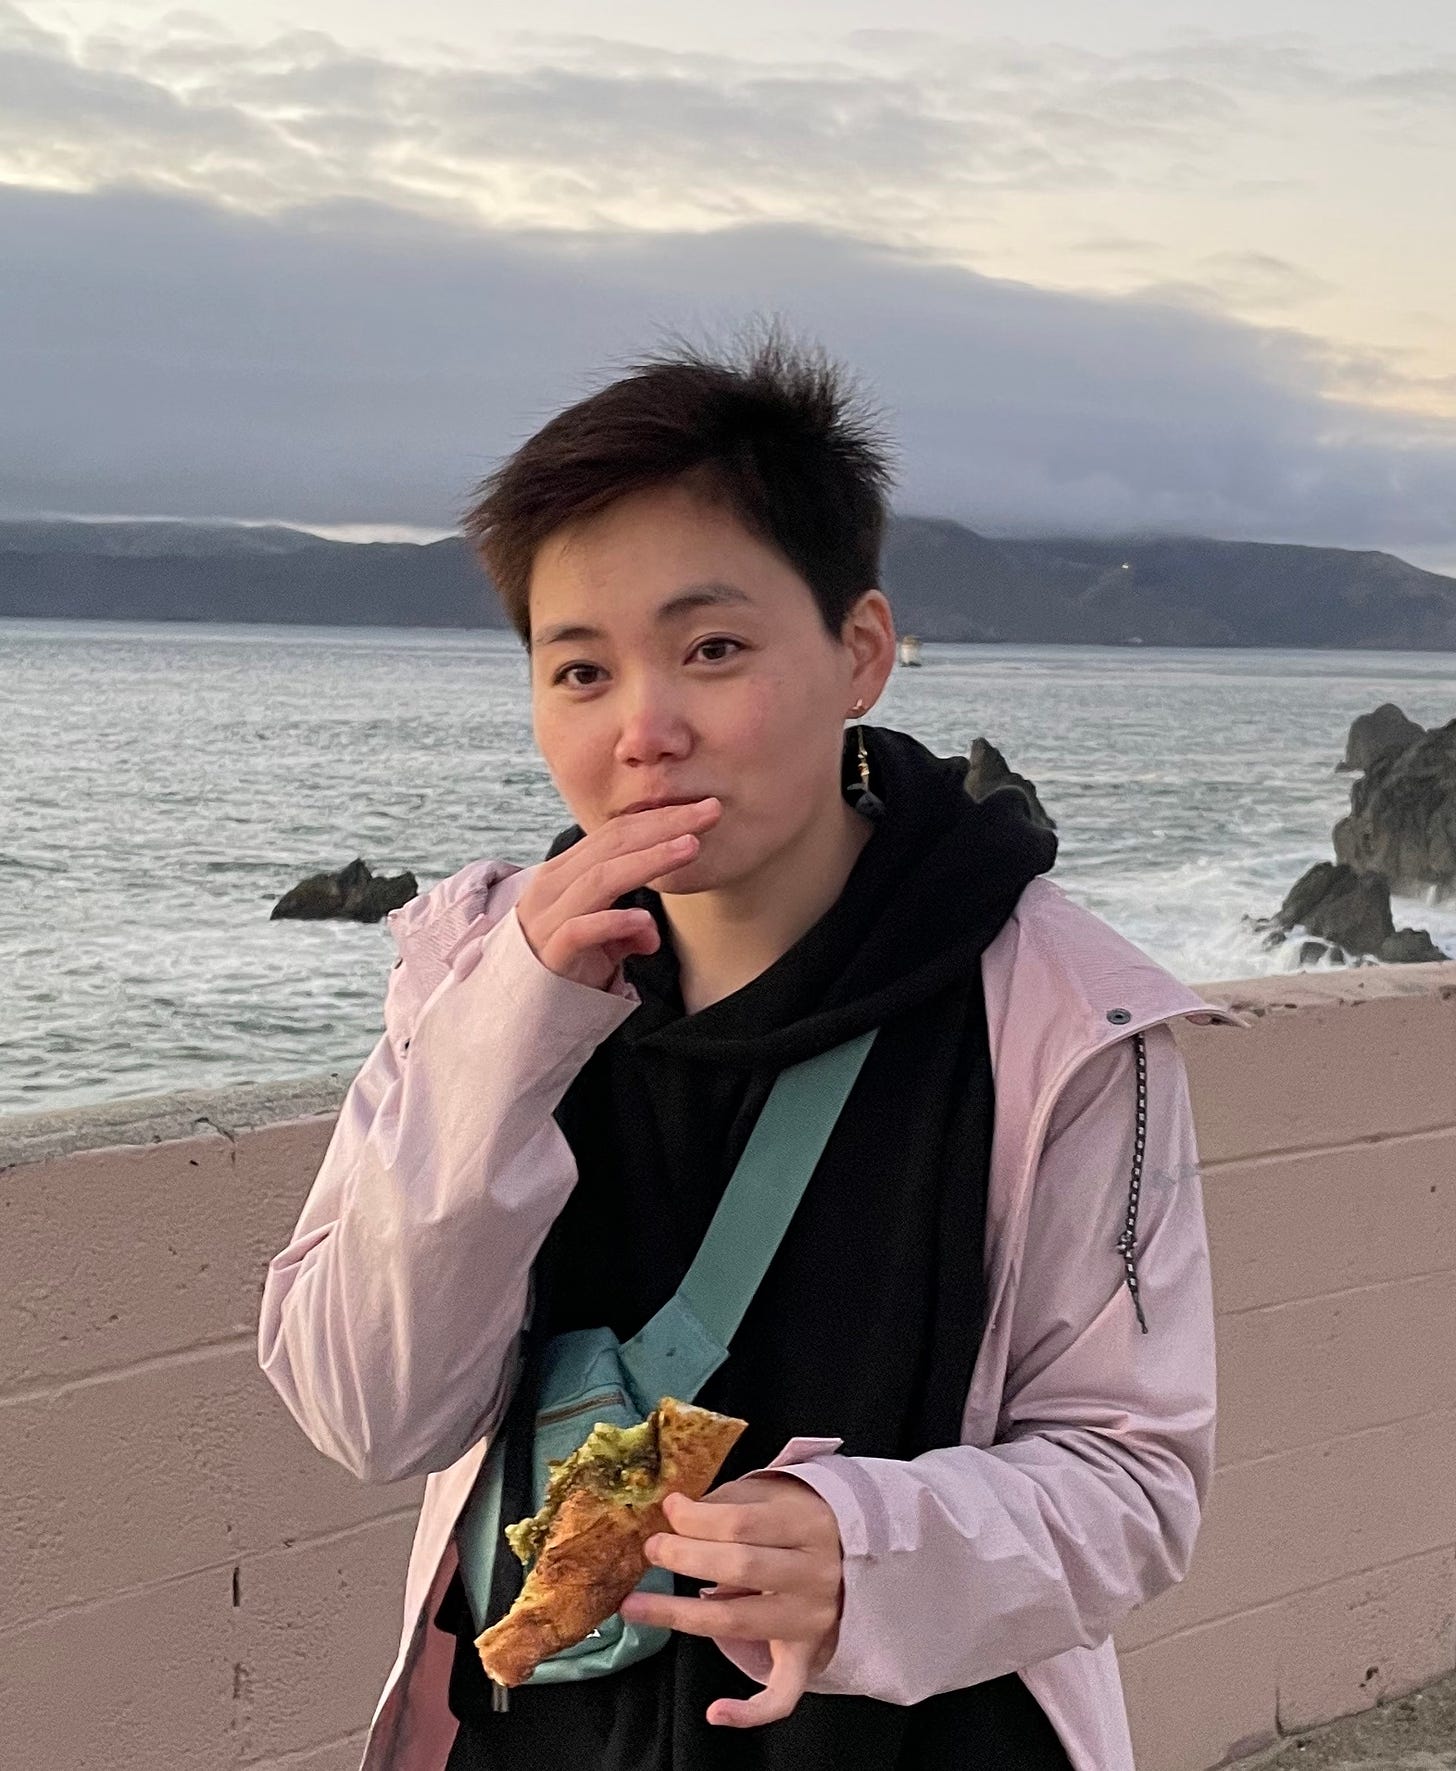 a person with short black hair standing outside and eating a slice of pizza. behind them is a seashore and cloudy sky.